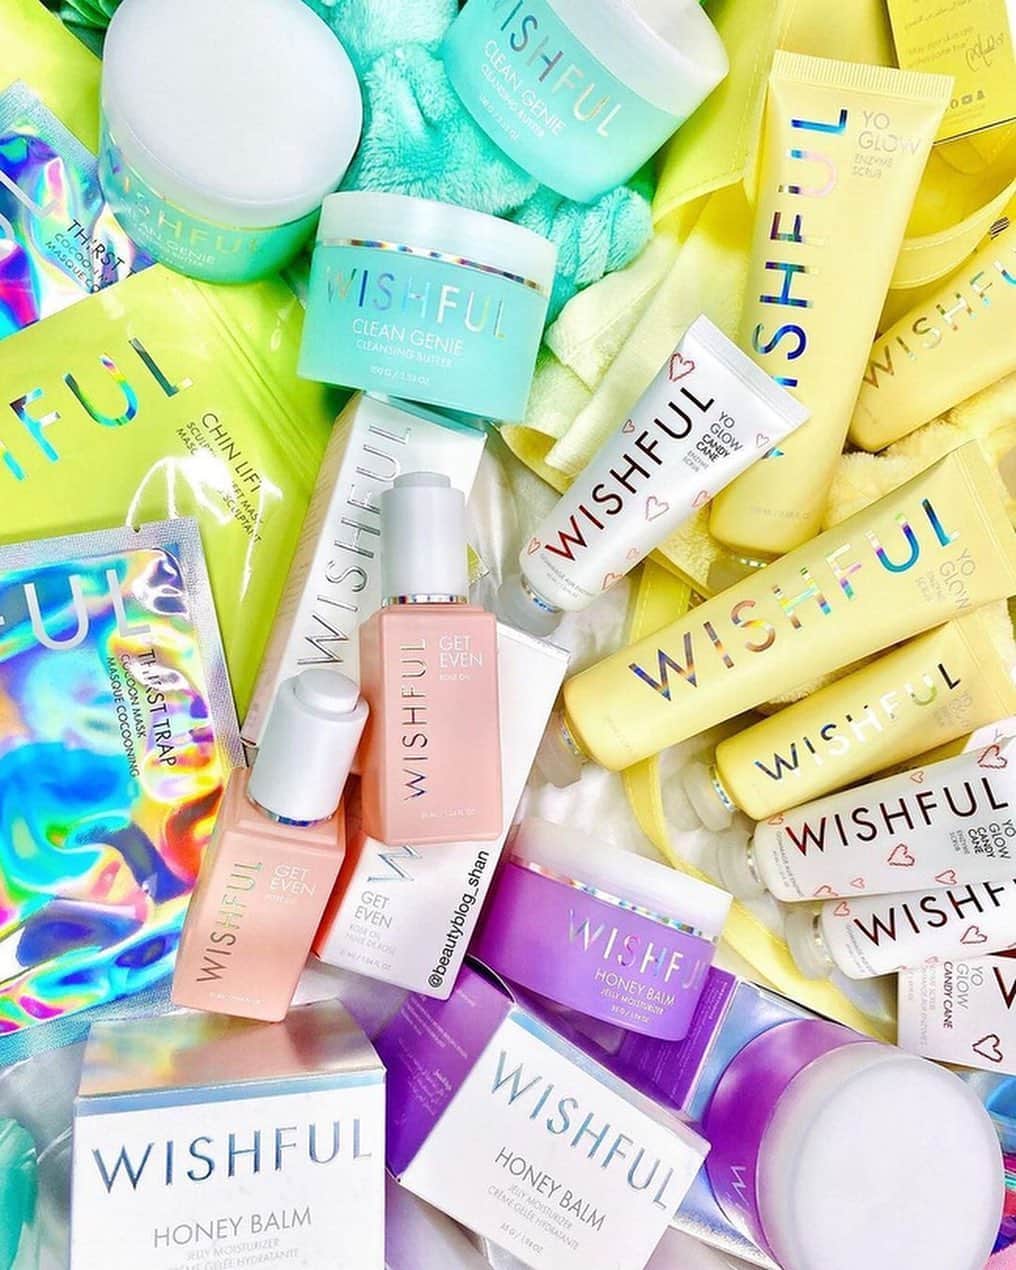 Huda Kattanのインスタグラム：「👑 HUGE WORLDWIDE #GIVEAWAY 👑 It's time to normalize REAL beauty and embrace your skin journey - pores and all!! To celebrate #wishfulskin's first birthday, we're giving away the FULL @wishfulskin range to 50 of you beautiful people 💛 For the chance to #win, all you have to do is: ✨ Share your real skin selfie* & tag @wishfulskin & #NormalizeRealBeauty ✨ Follow @wishfulskin ⠀⠀⠀⠀⠀⠀⠀⠀⠀ Contest ends on 1st Mar 9PM GST & winners will be announced on www.hudabeauty.com. *Please make sure your account is public so we can see your beautiful post! Please make sure it's a real skin selfie without makeup, filters or editing. Good luck my loves! Love you all sooo much💖 ⠀⠀⠀⠀⠀⠀⠀⠀⠀ Thank you so much for sharing my loves @beautyblog_shan @mini.j2 @skincaremad @__orquideah_ @by_ner_bawse @twinsbeautycorner_2」